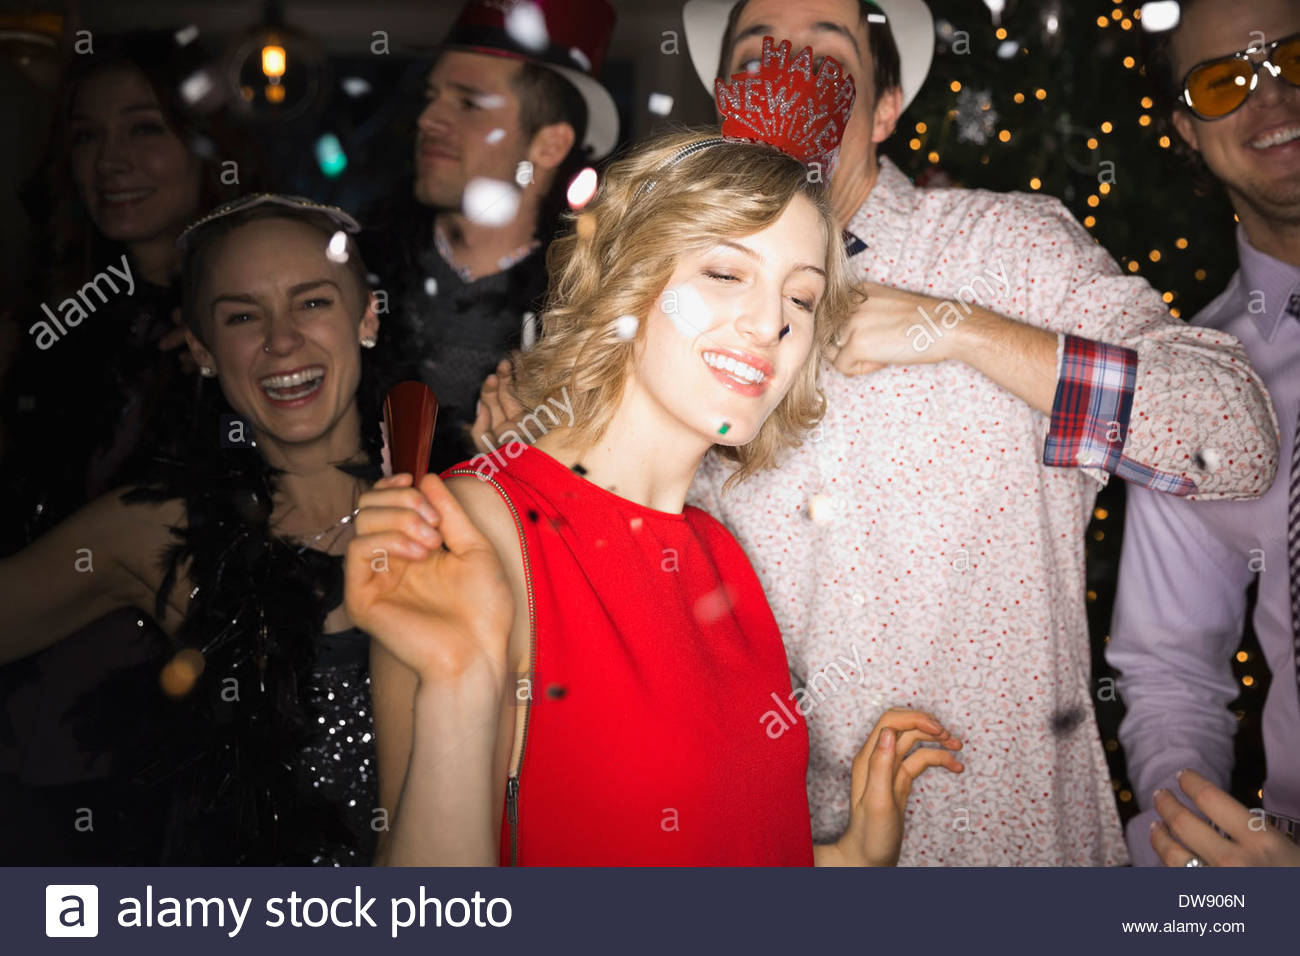 Friends celebrating New Years Eve party Stock Photo